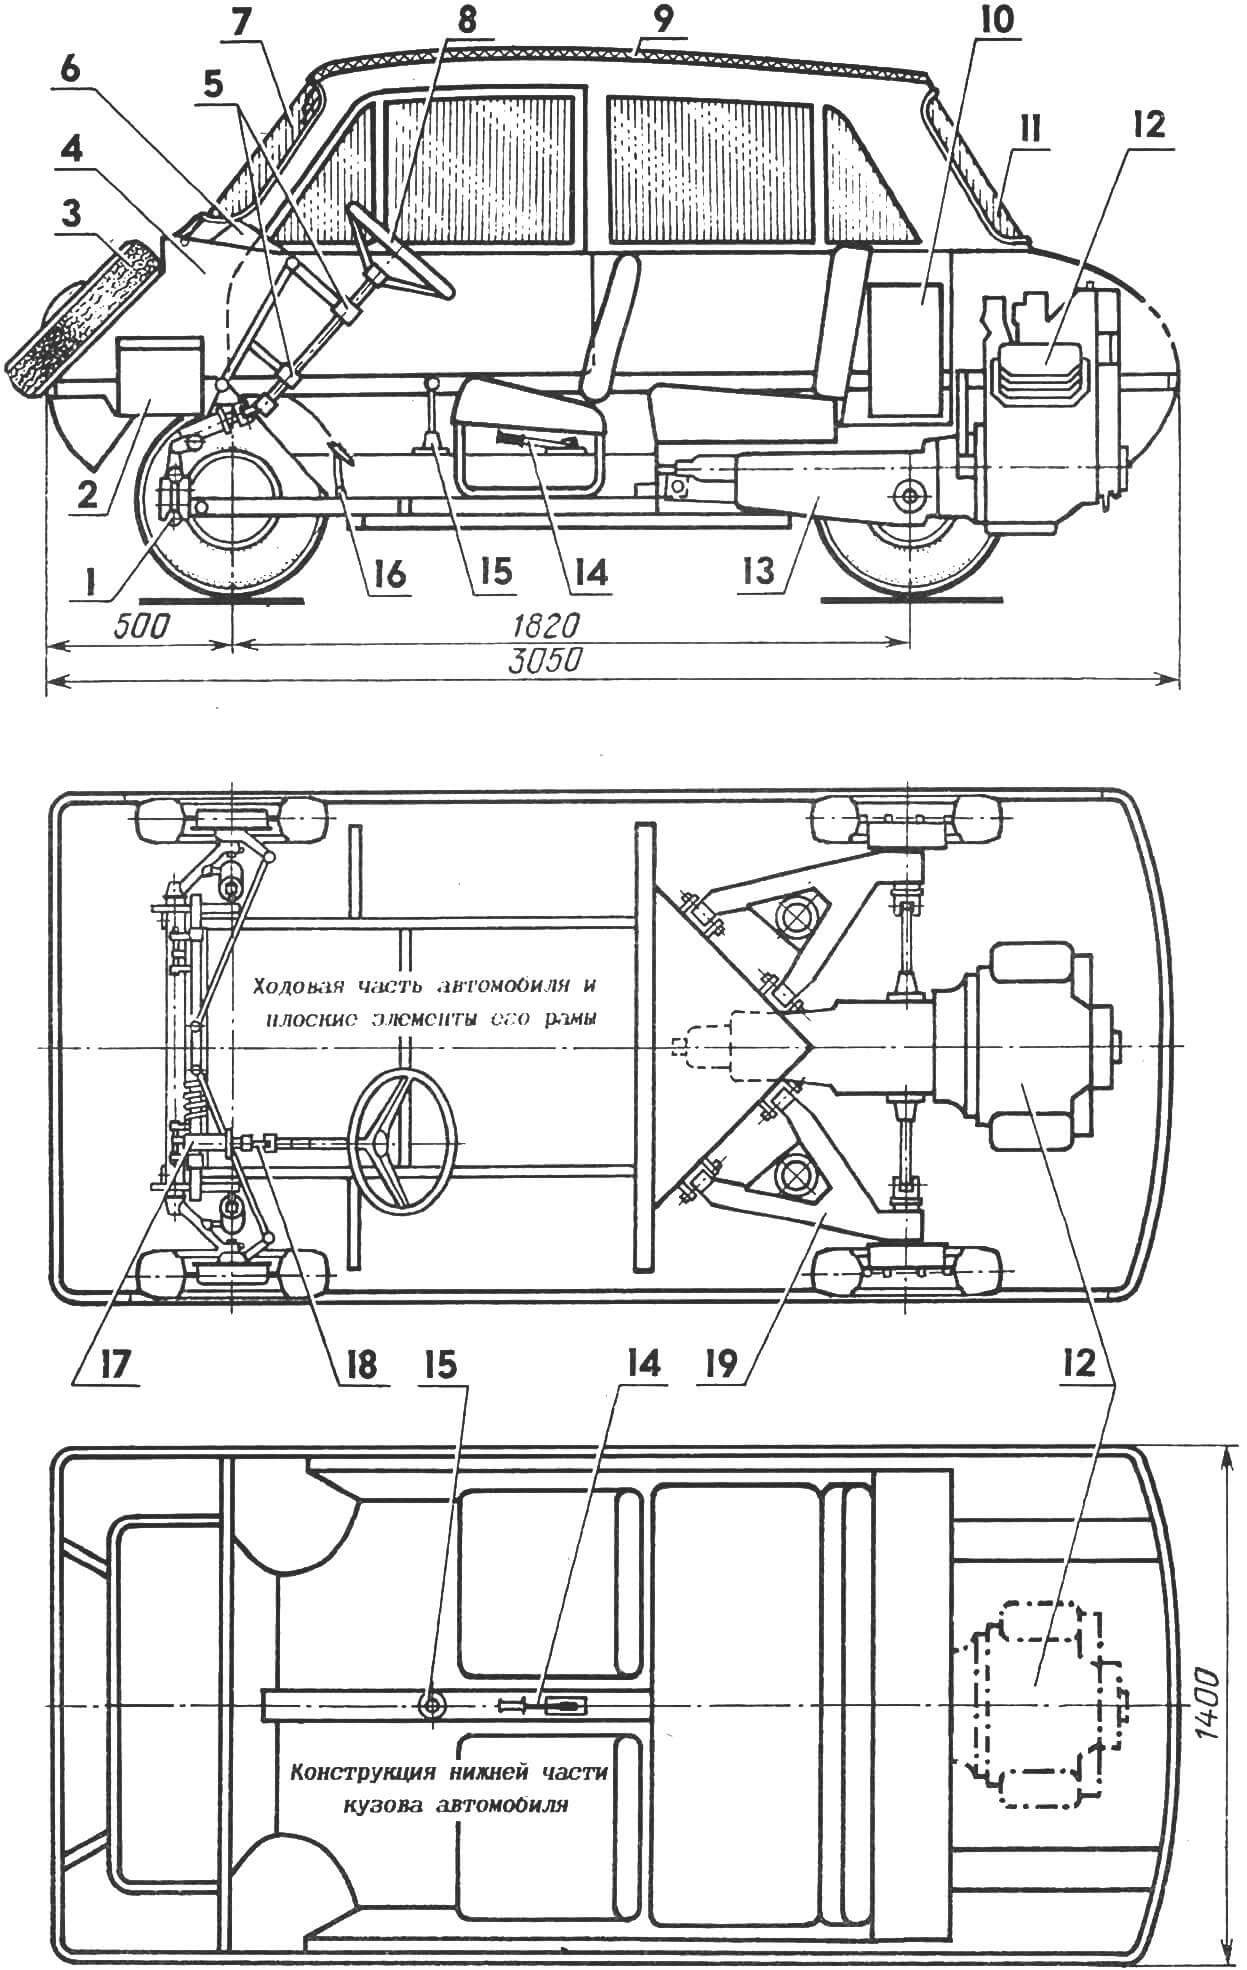 Rice . 2. The layout of the Delta car